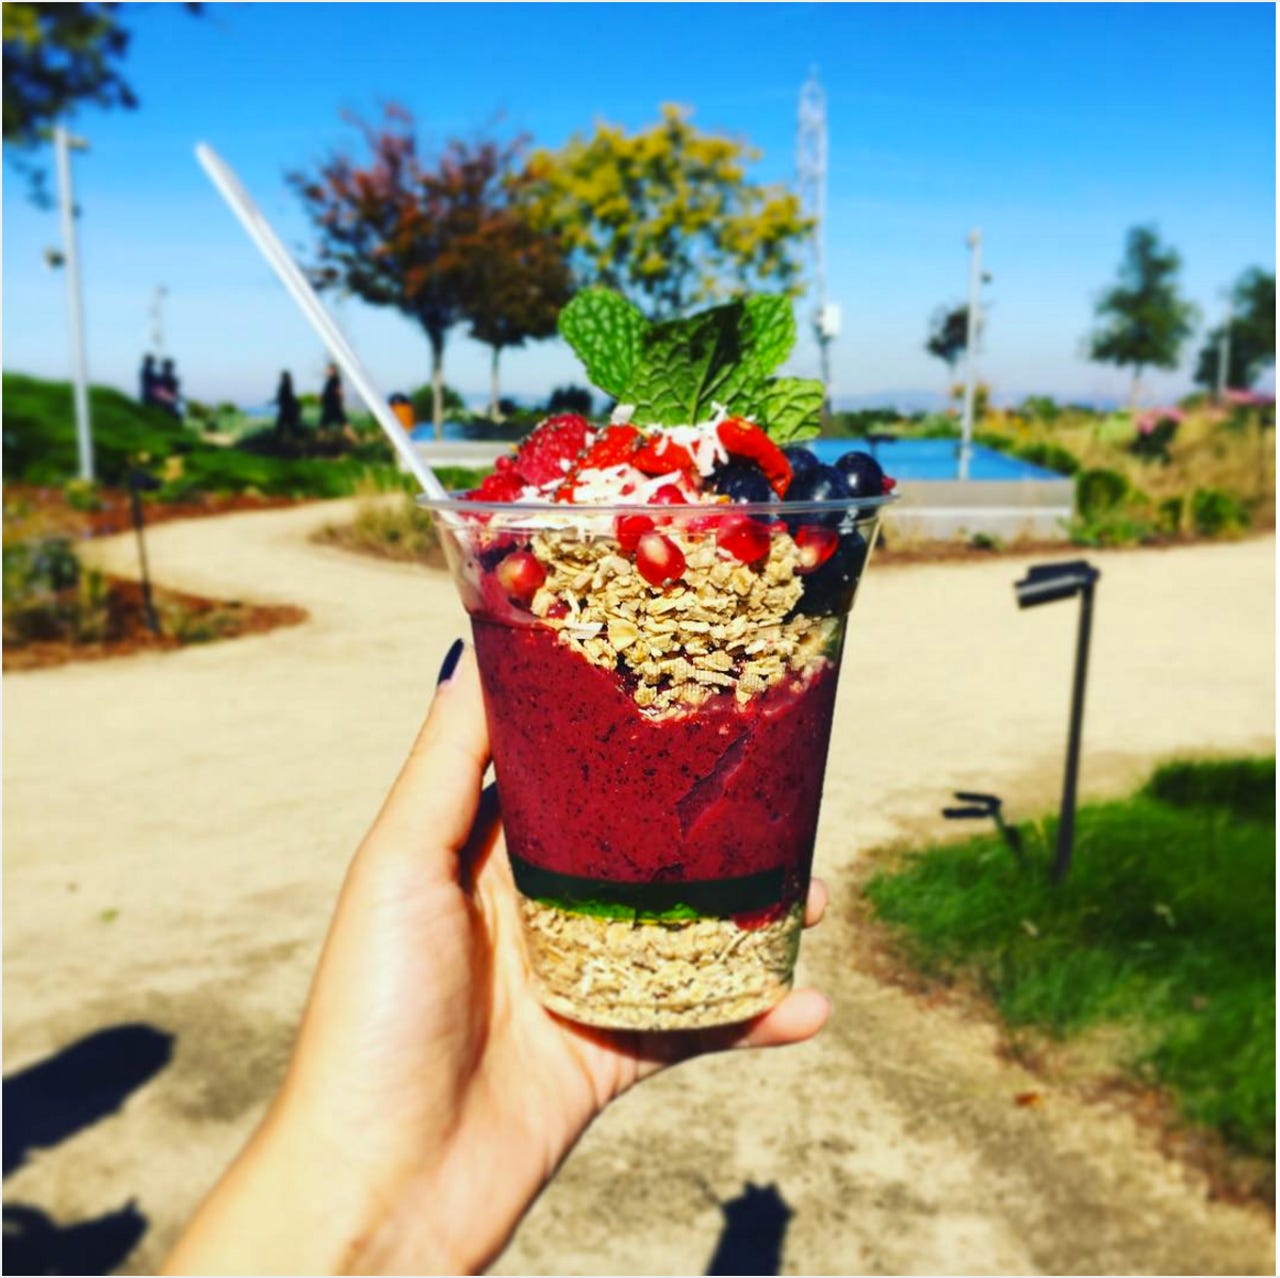 Acai bowl from the Facebook cafeteria